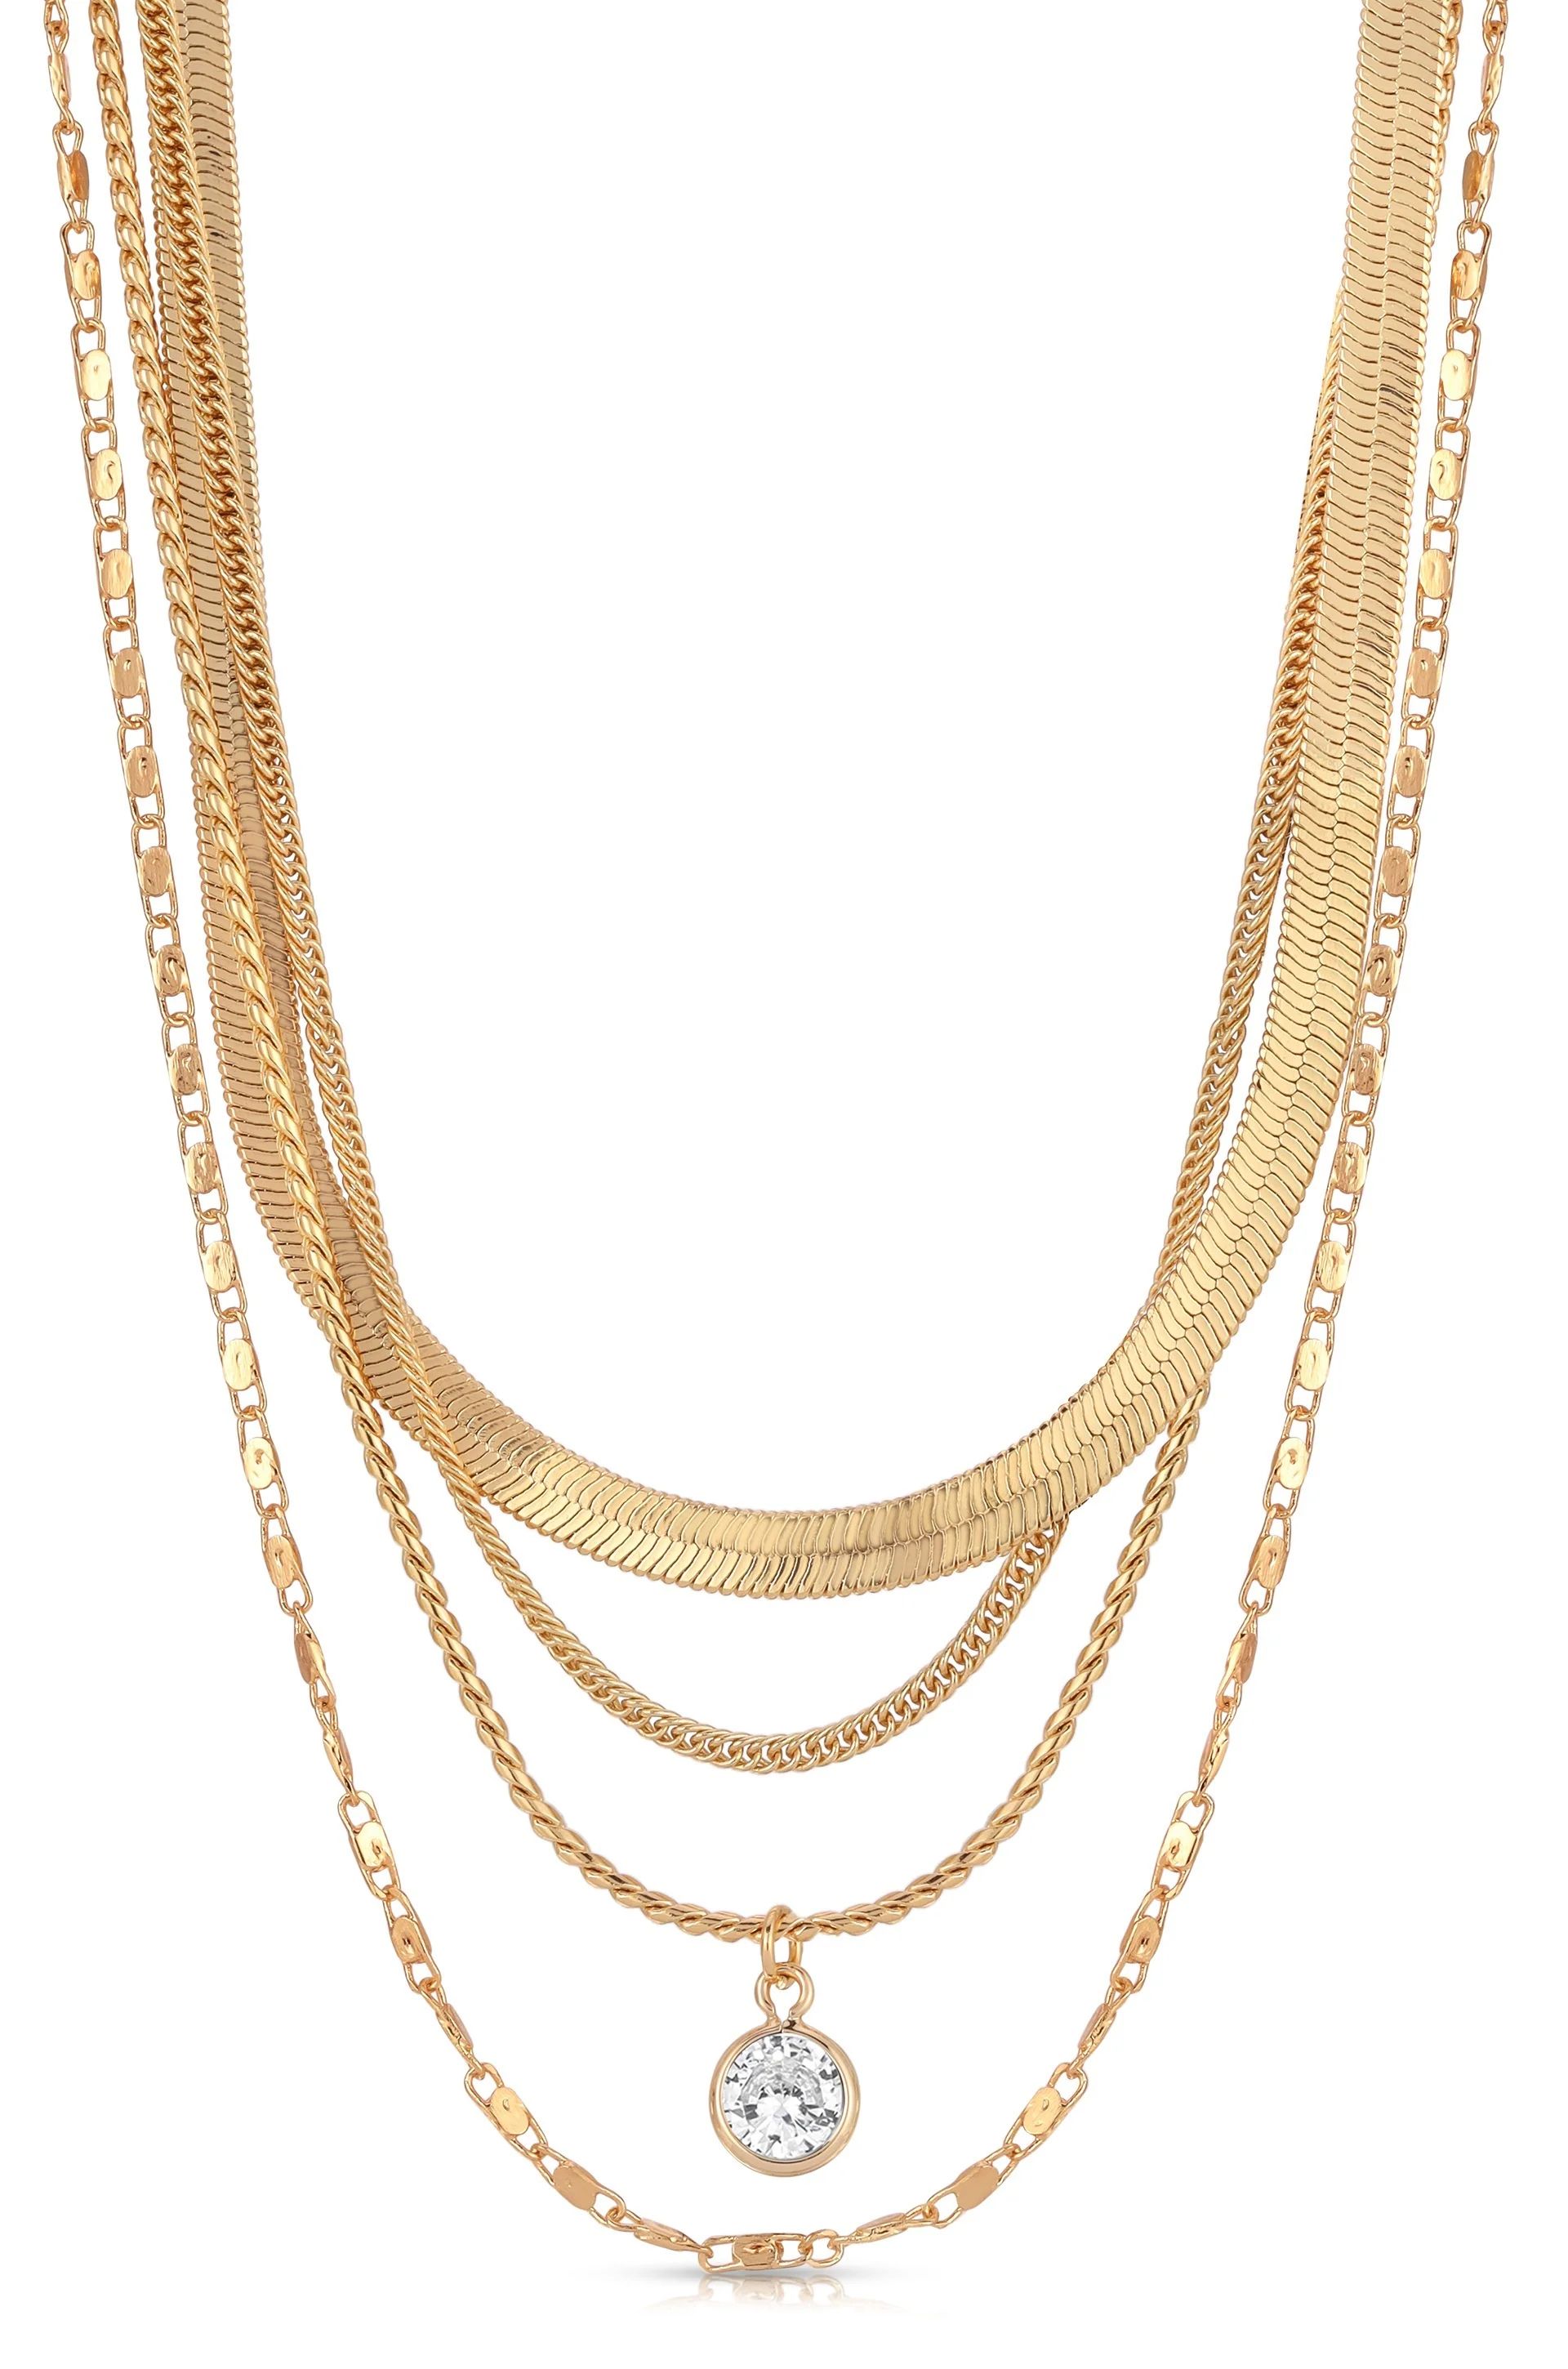 All the Chains 18k Gold Plated Layered Necklace | Ettika